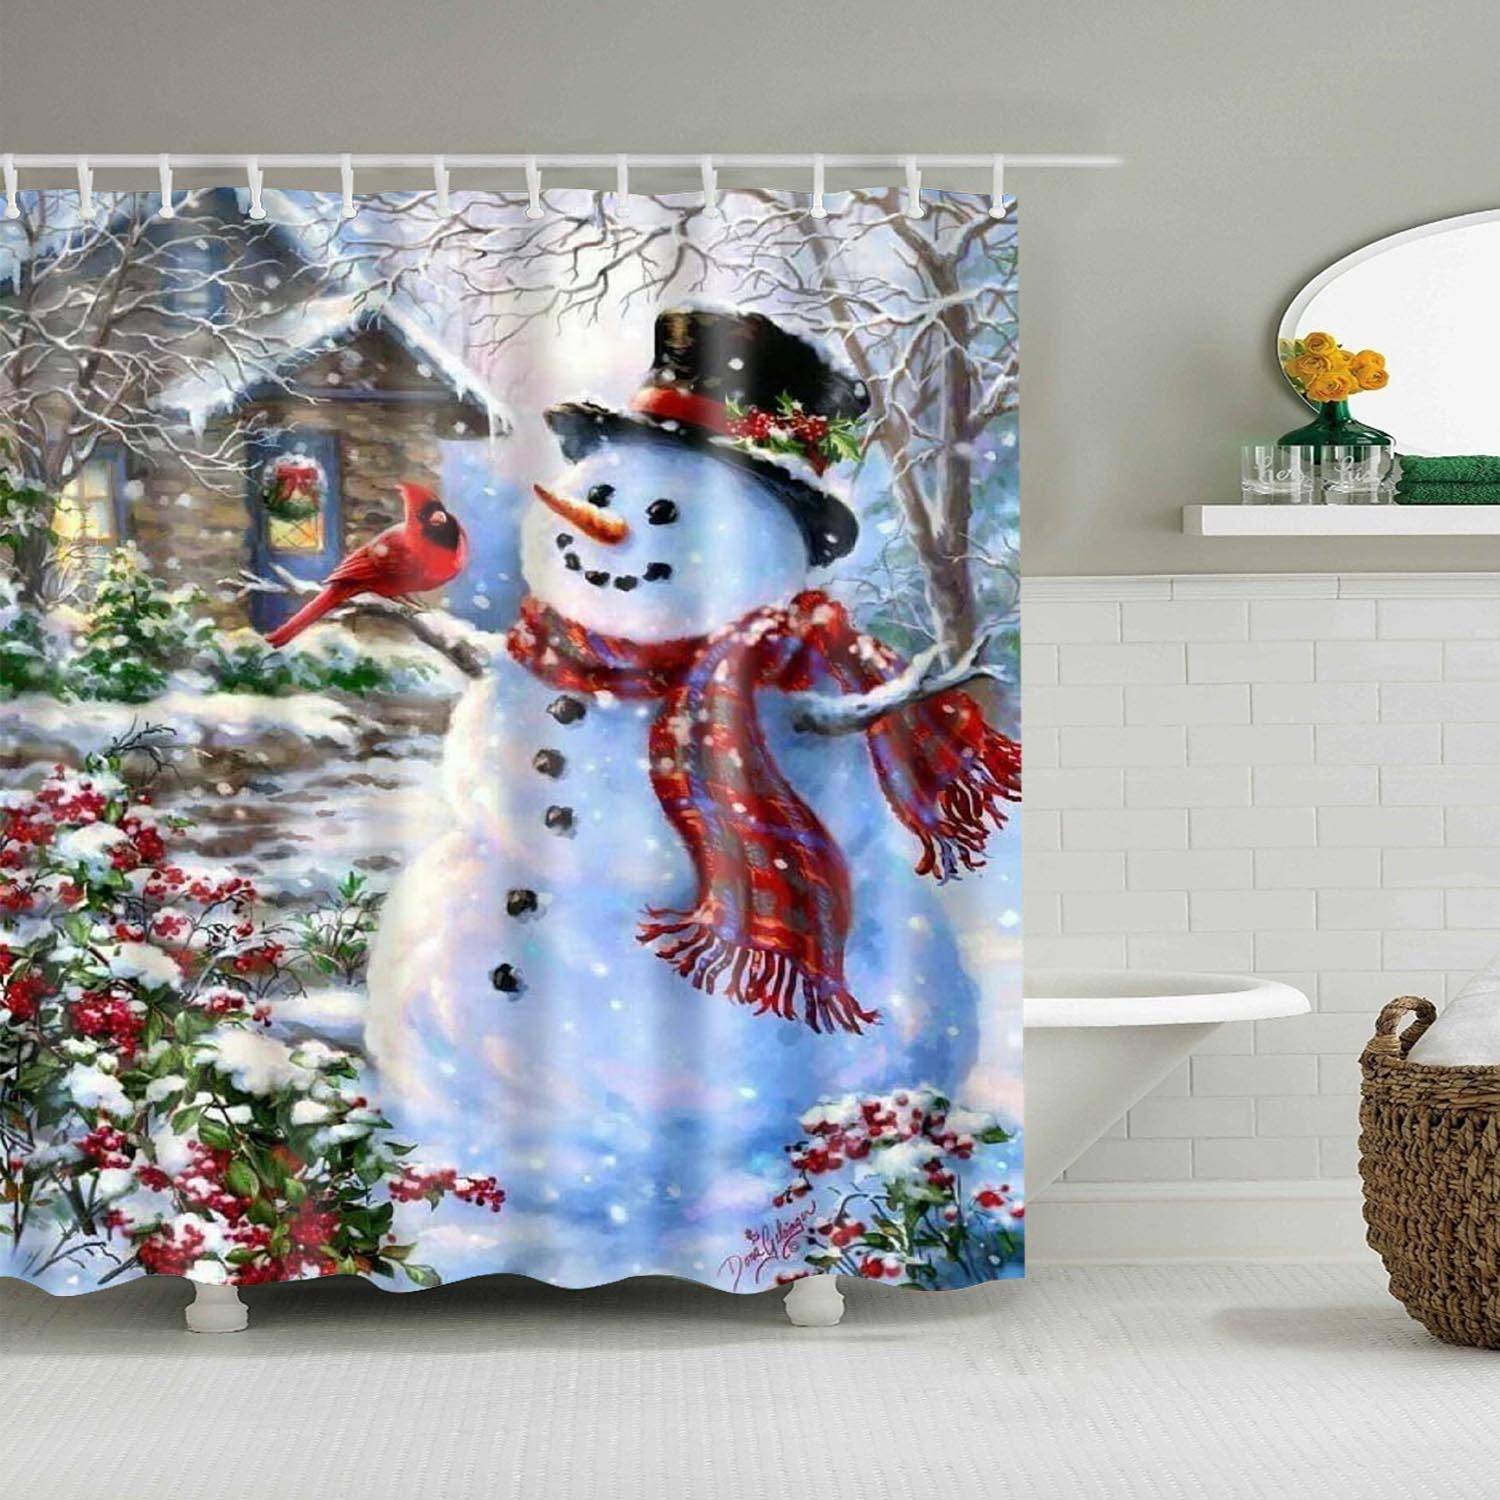 Christmas Winter Bird with Country Outhouse Snowman Shower Curtain